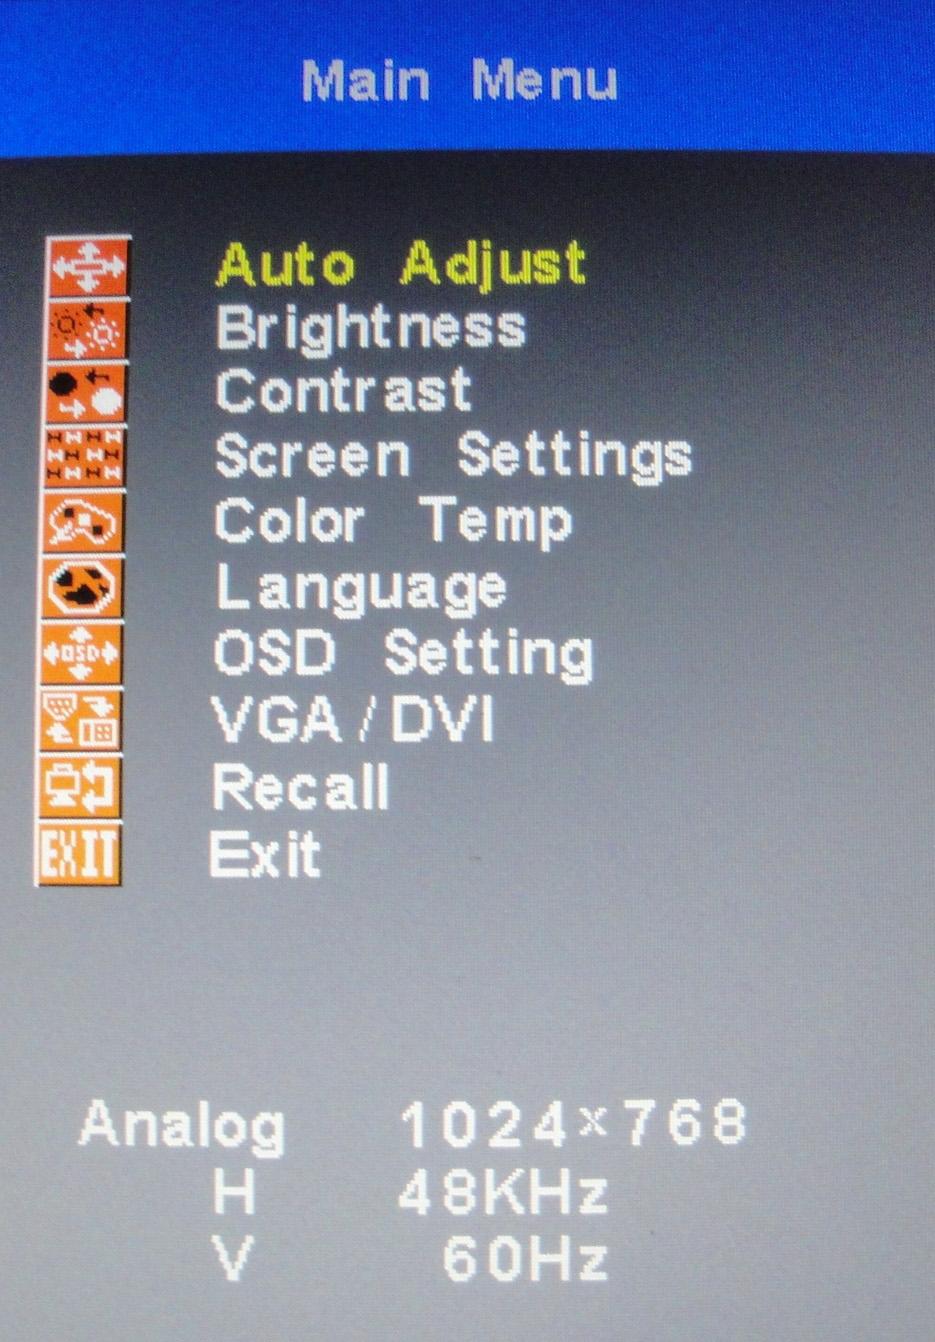 3.1 OSD Functions (IDS-3115 Series) The OSD images of the IDS-3115 display (1024 x 768 resolution) below were selected for illustrative purposes: Buttons Description Power Turn the monitor power ON